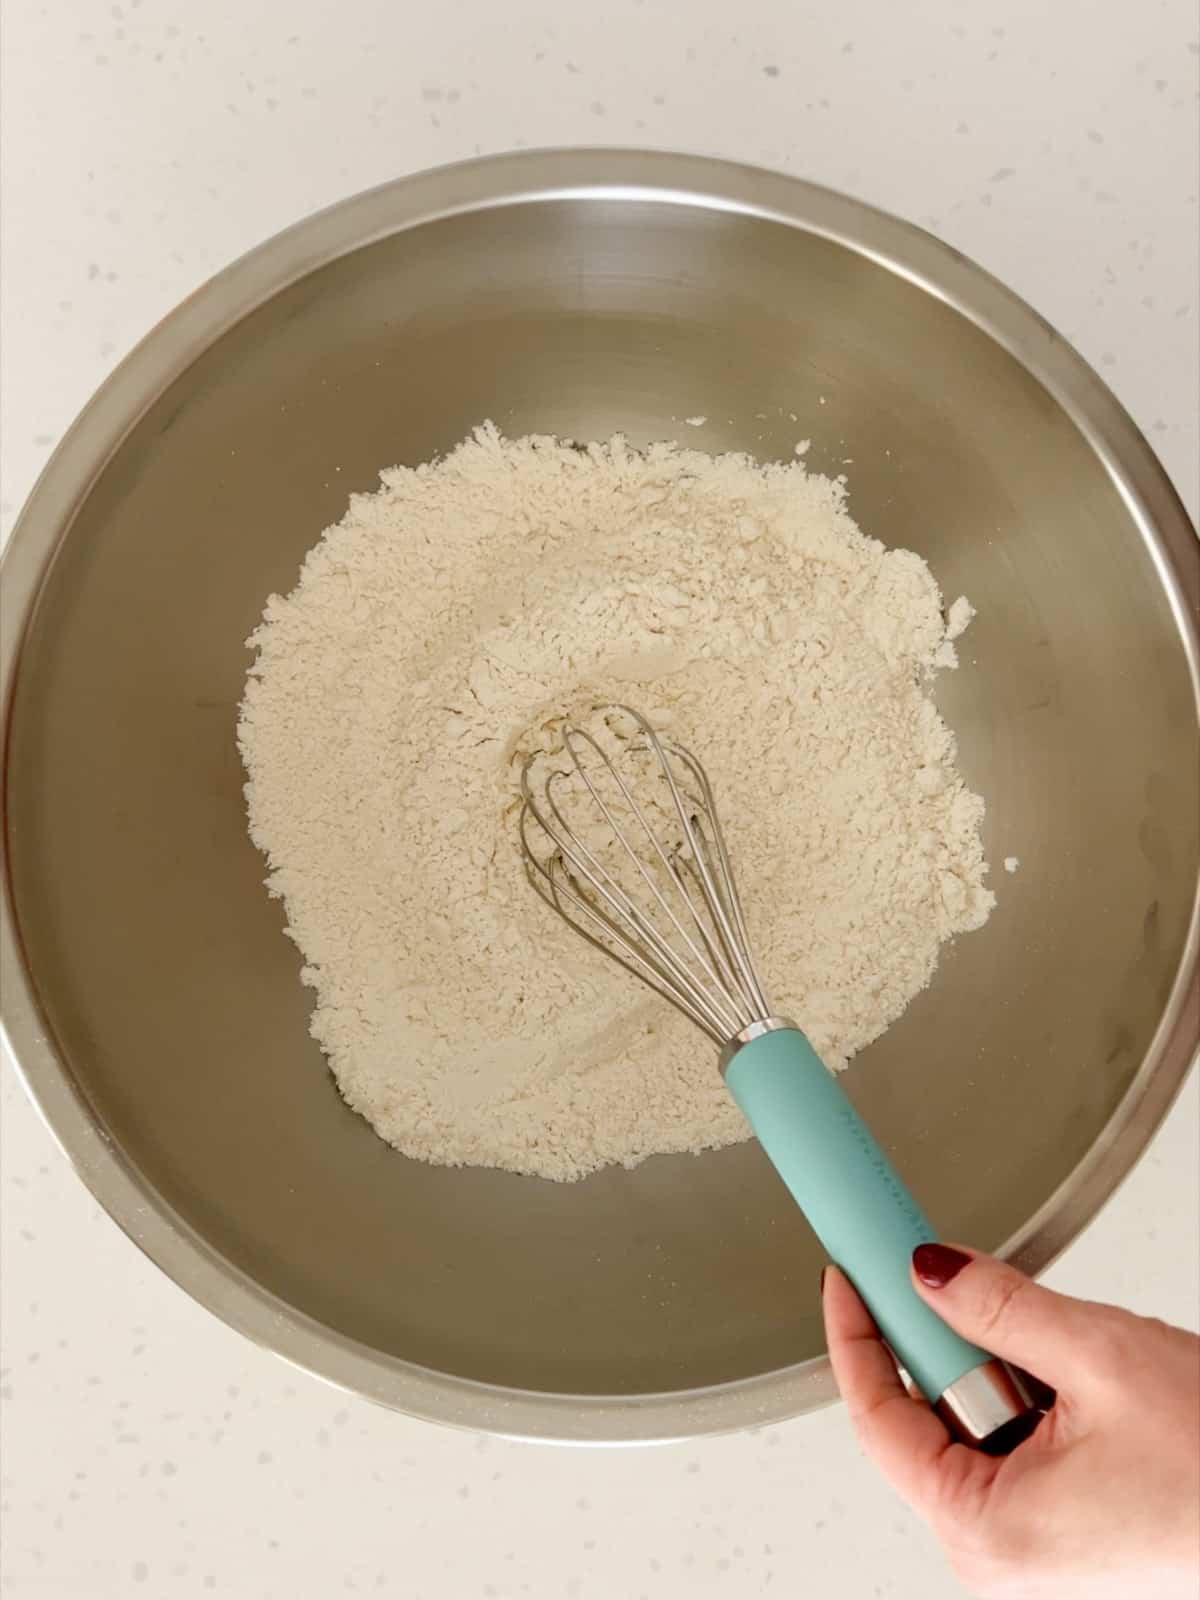 Flour, salt, and sugar whisked together in a bowl.